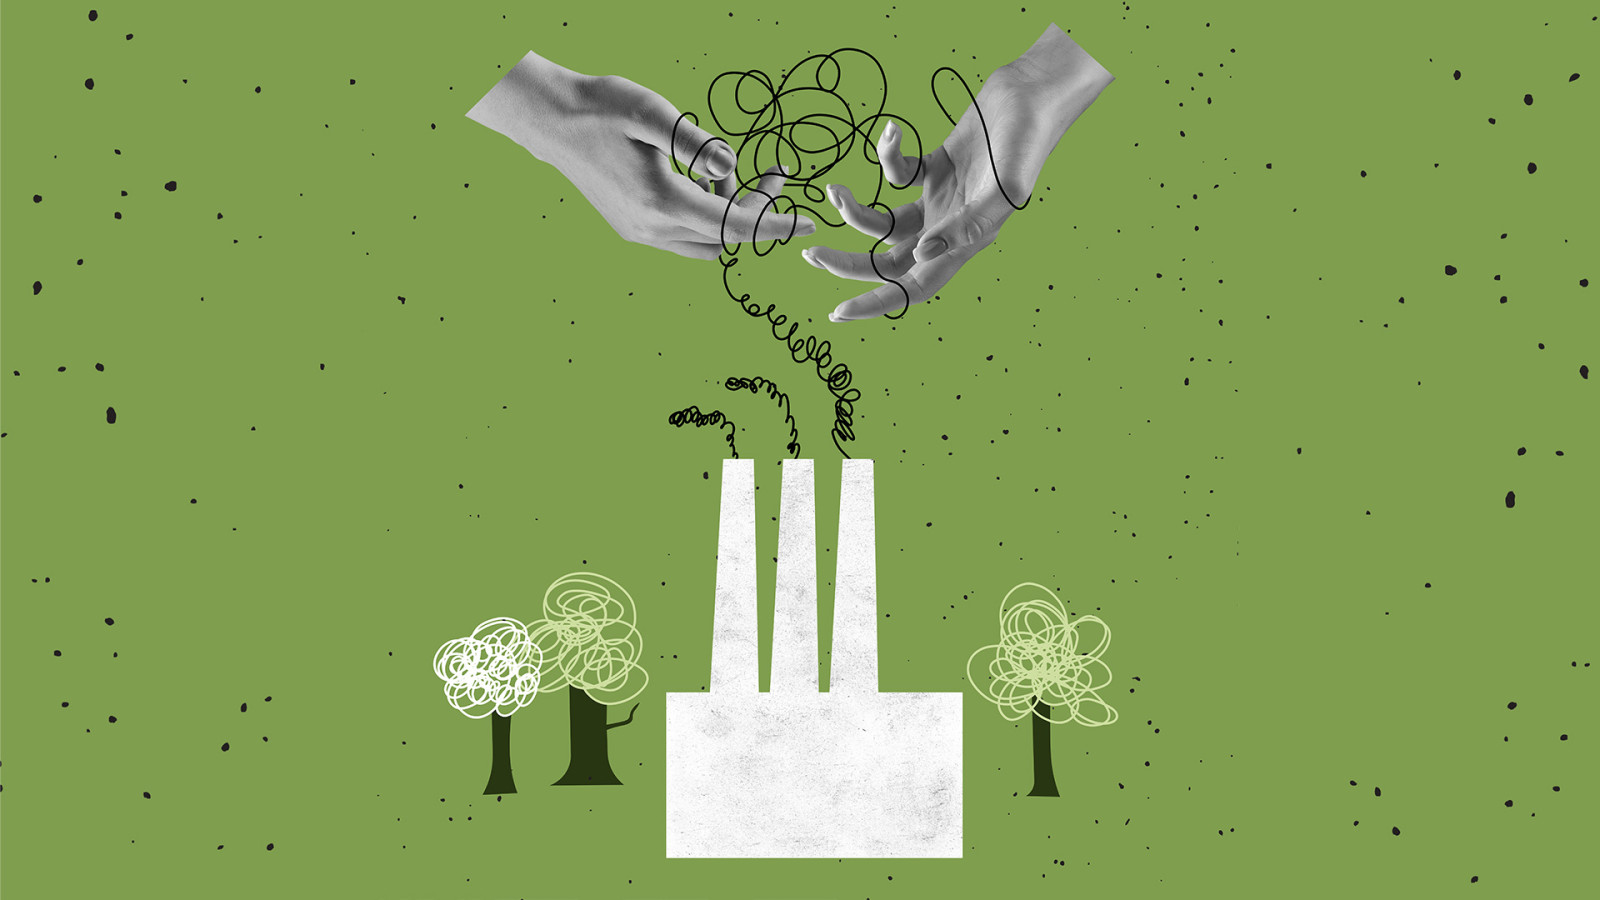 Mixed media hero image of trees and power station with squiggles held by a pair of hands for Wardour blog on how to cut greenwashing from comms plan